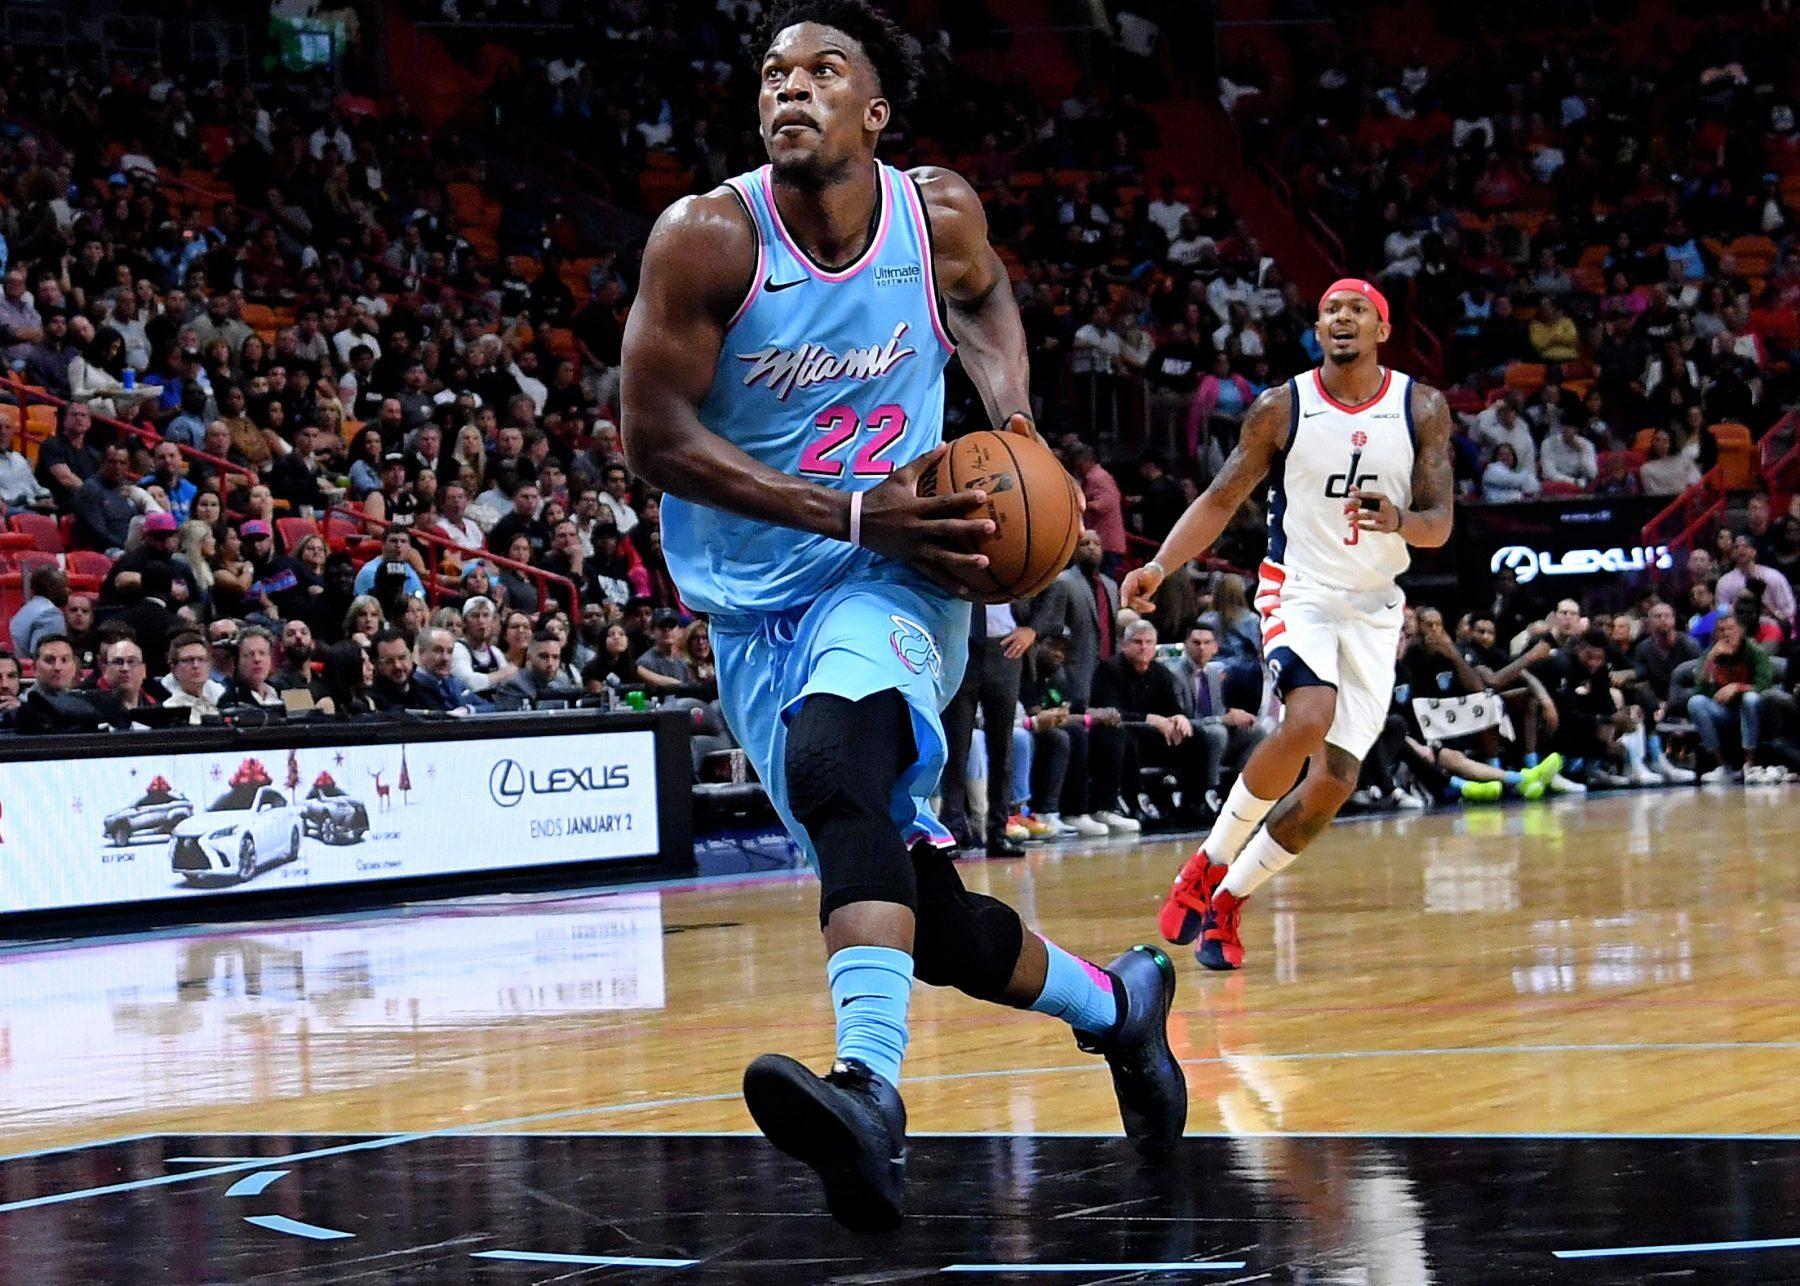 Miami Heat News: Jimmy Butler Named Eastern Conference Player